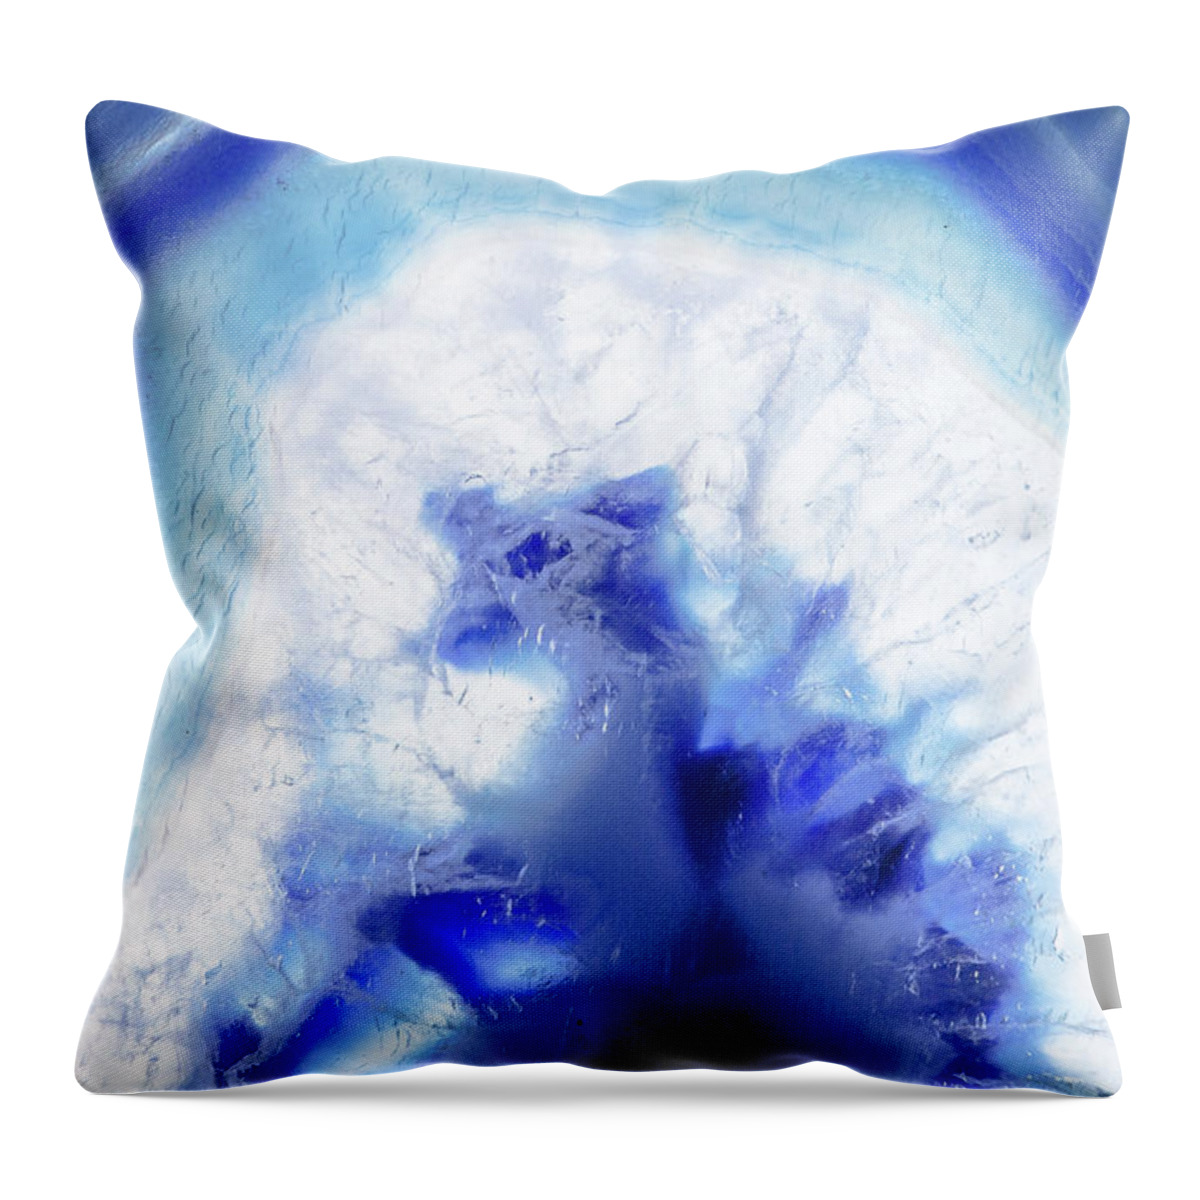 Gem Throw Pillow featuring the photograph Level-2 by Ryan Weddle